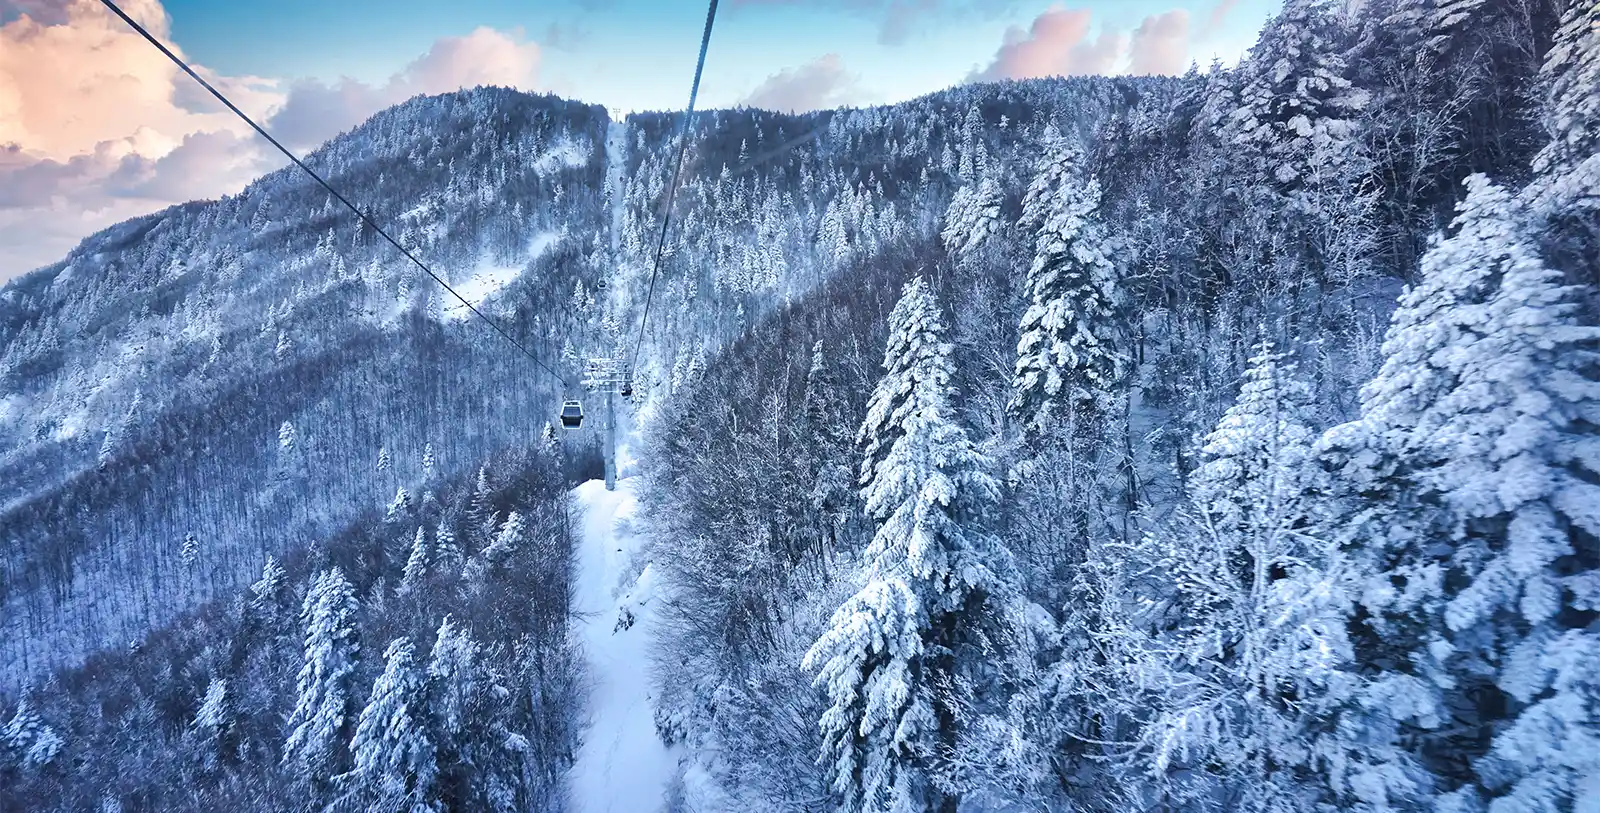 Uludag in Bursa is a center for winter sports. A spectacular view of uludag in snow.